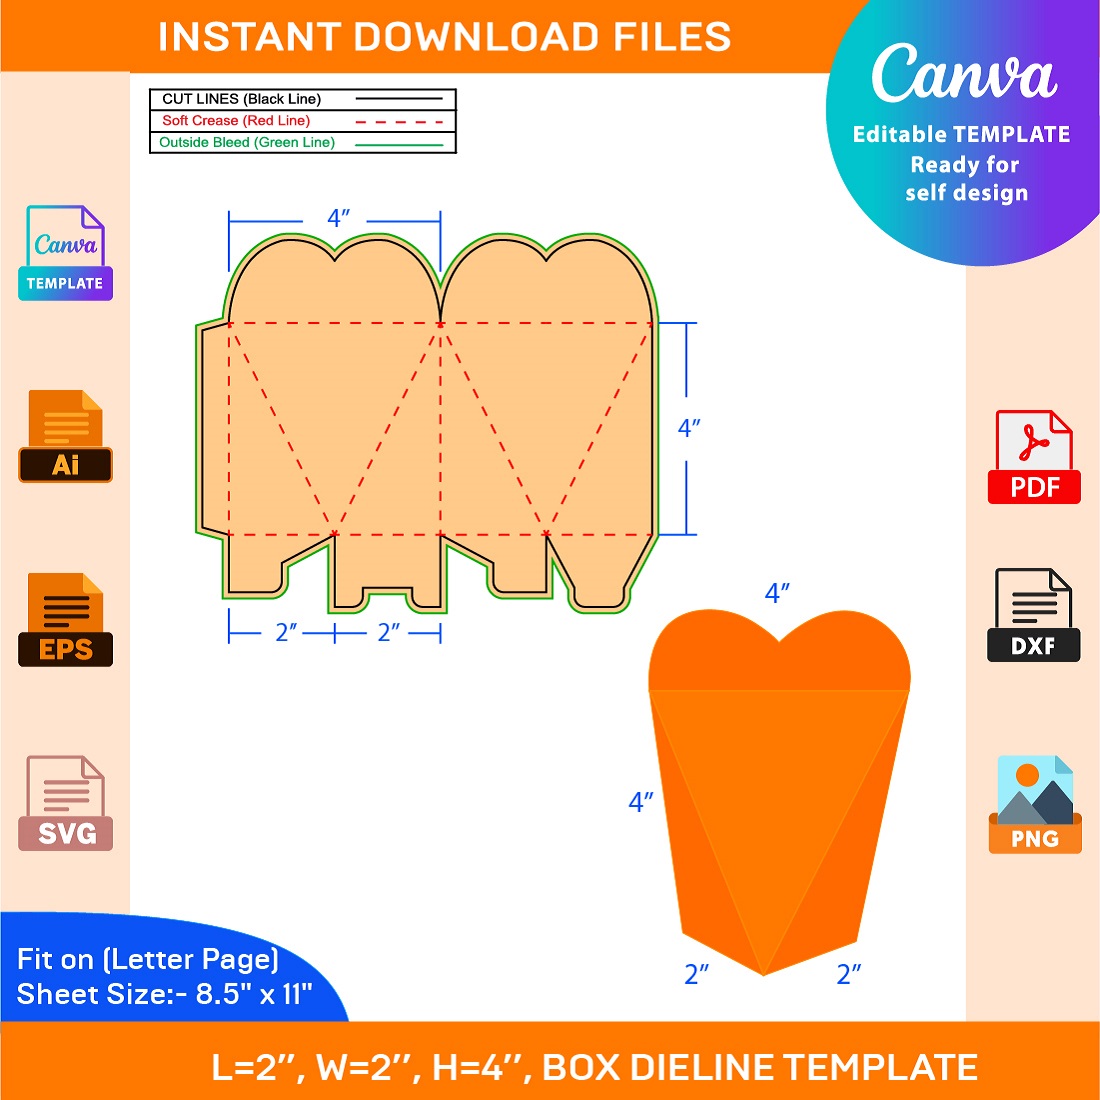 How to Fill a Shape with an Image in Canva - Canva Templates